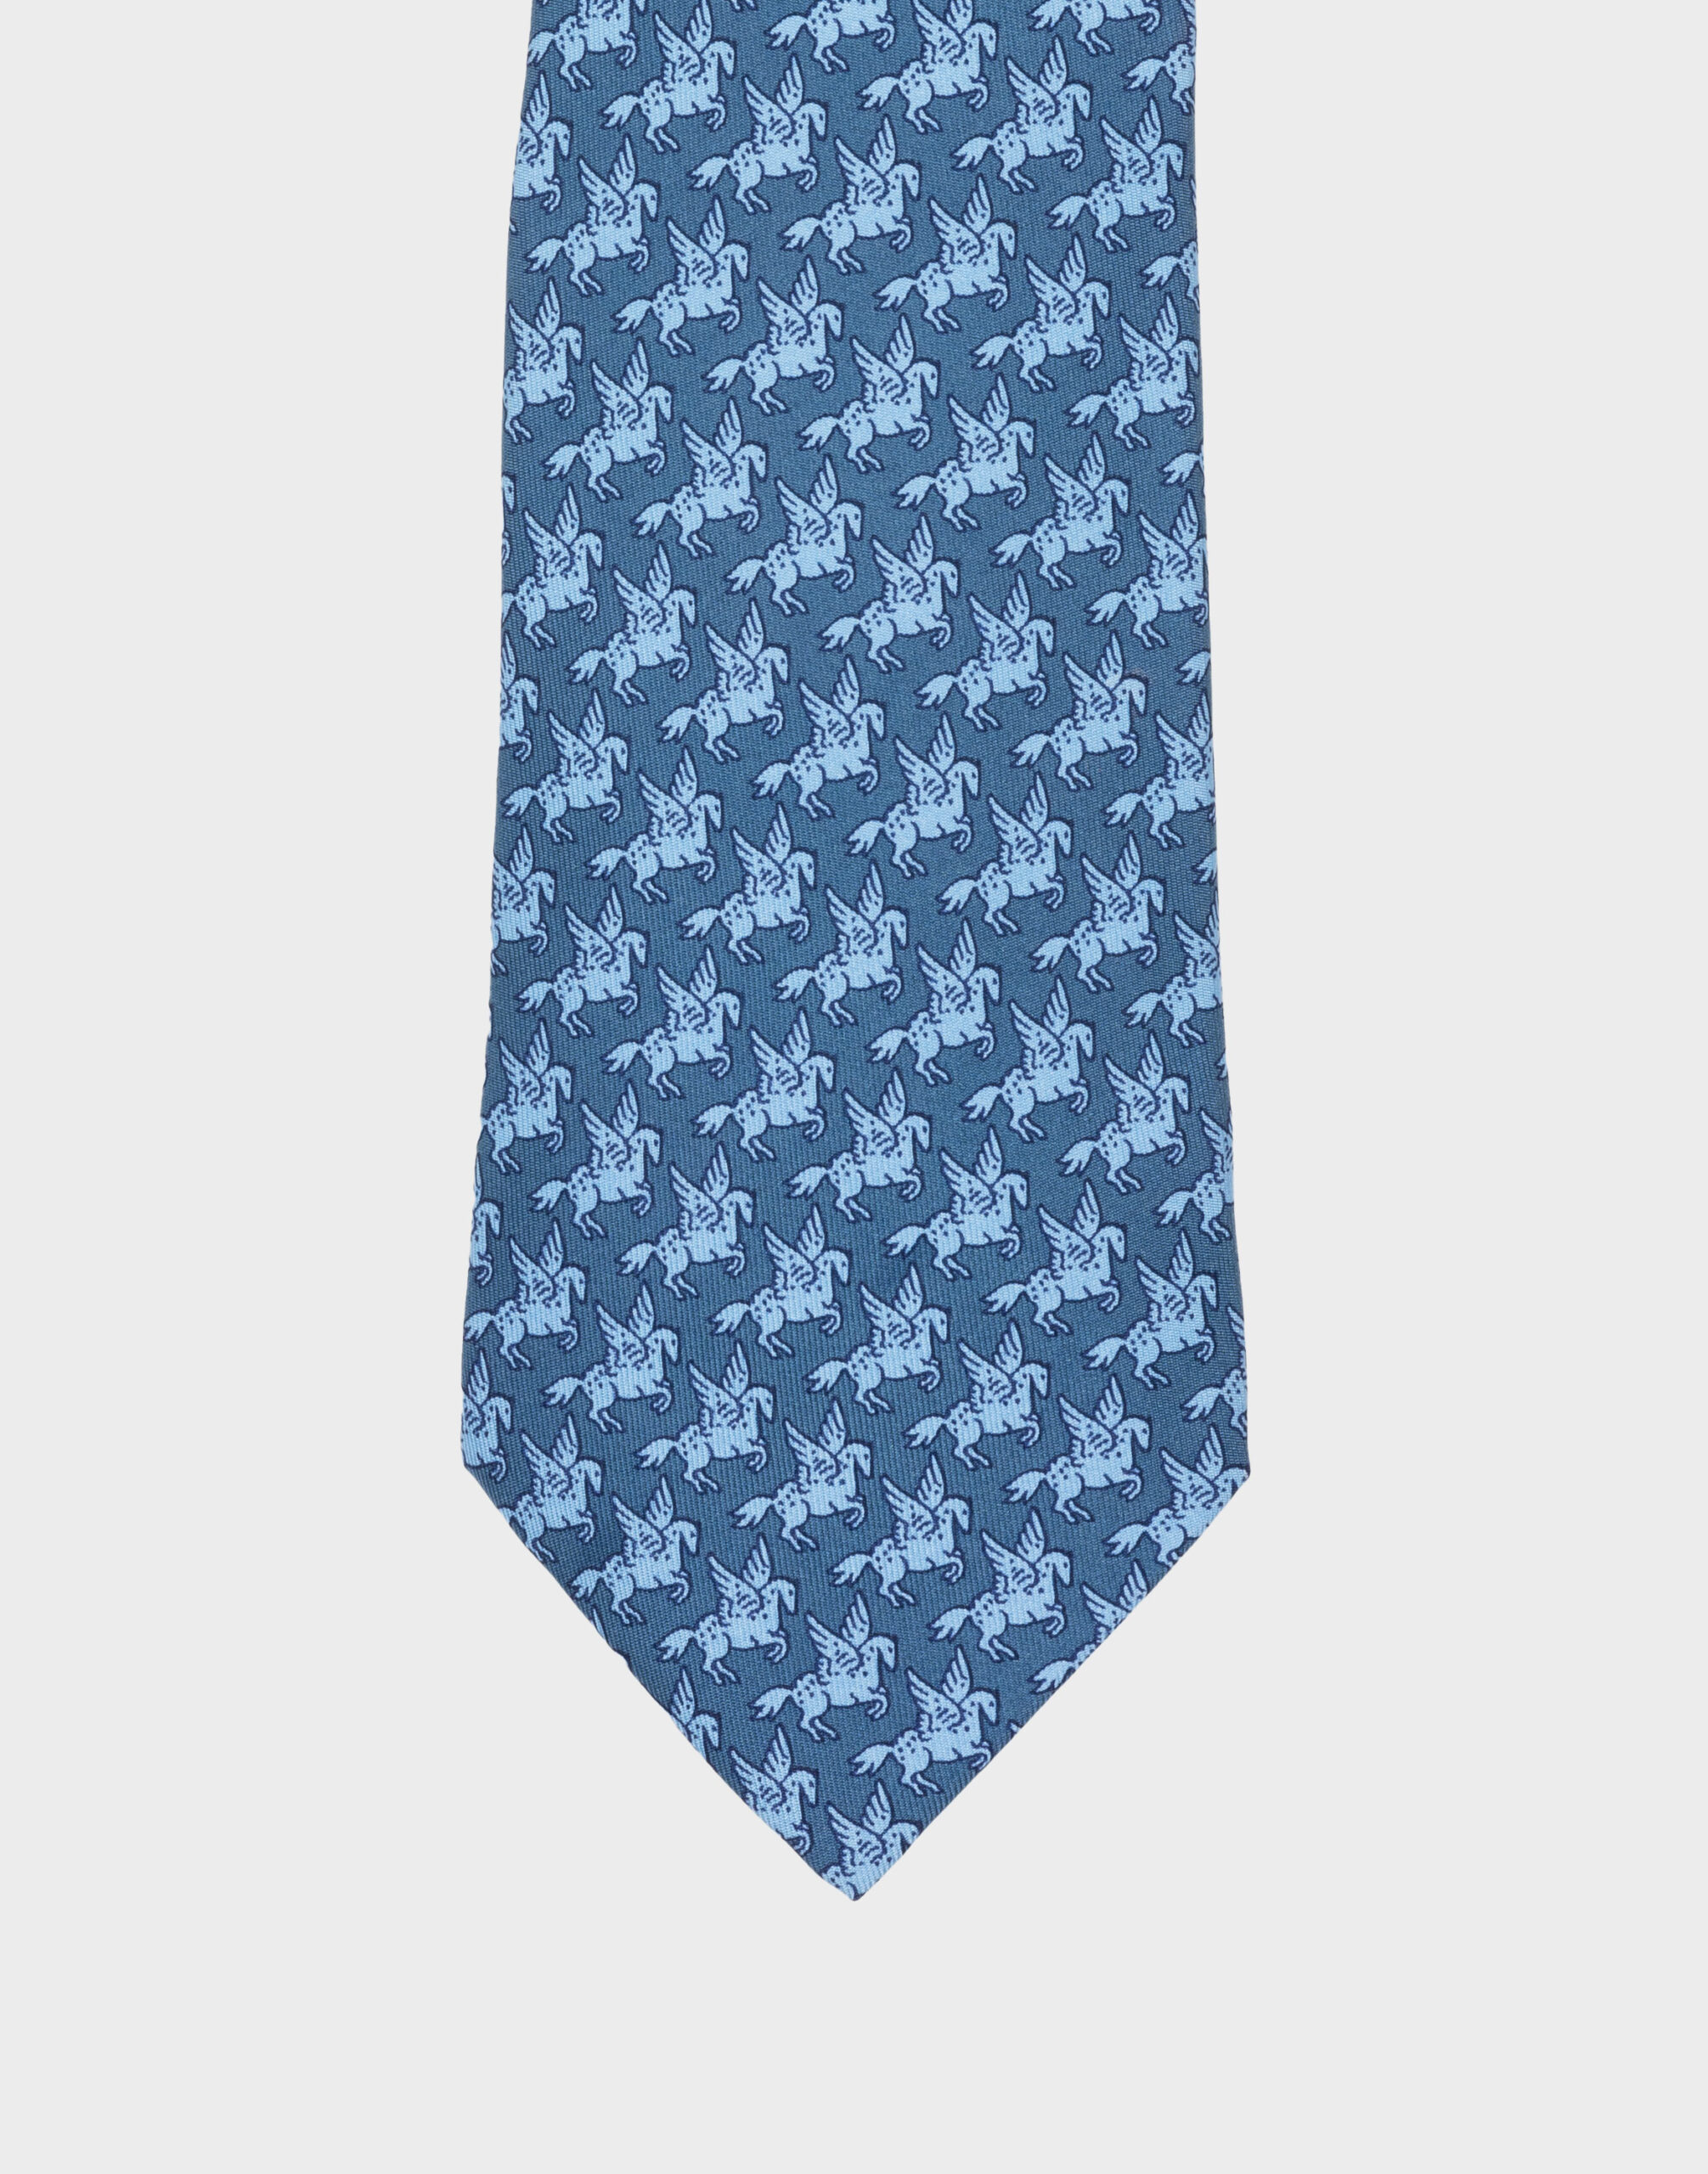 Men's light blue silk tie by Hermes featuring a pattern of winged horses